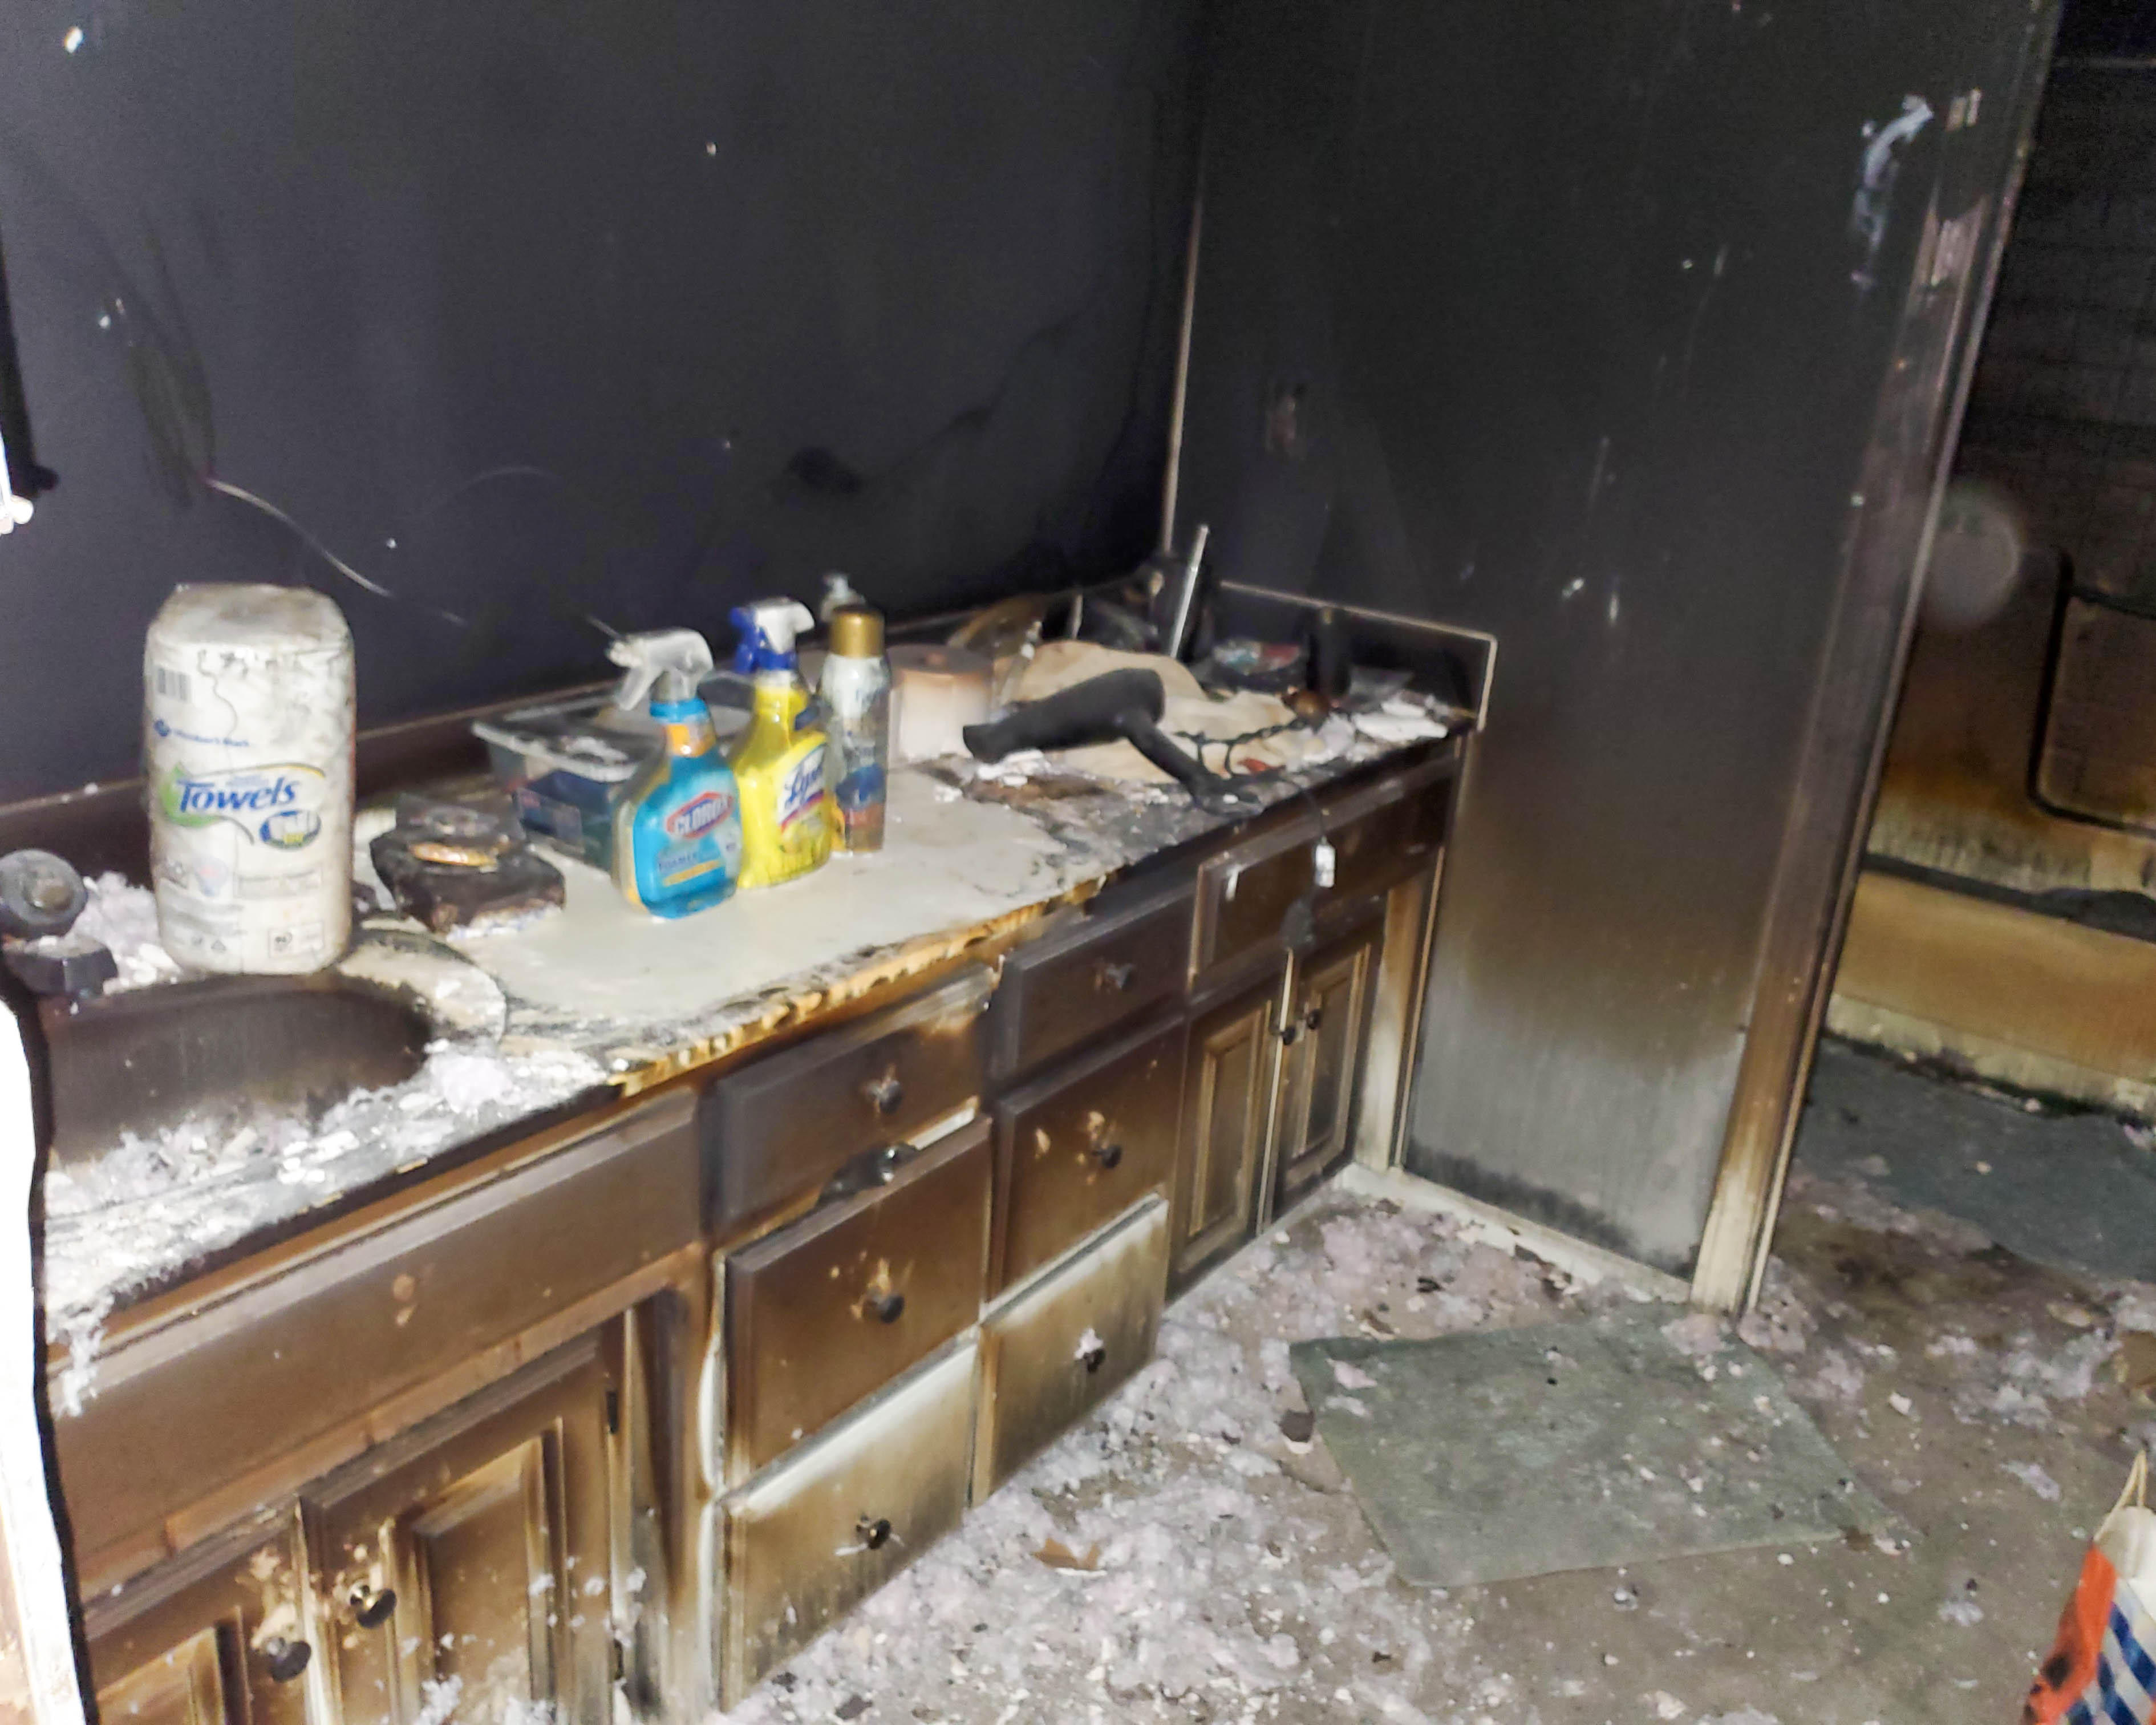 Fire and soot damage is a serious hazard that requires immediate attention. If you've experienced a fire, SERVPRO of Leawood/Overland Park is here to help you.